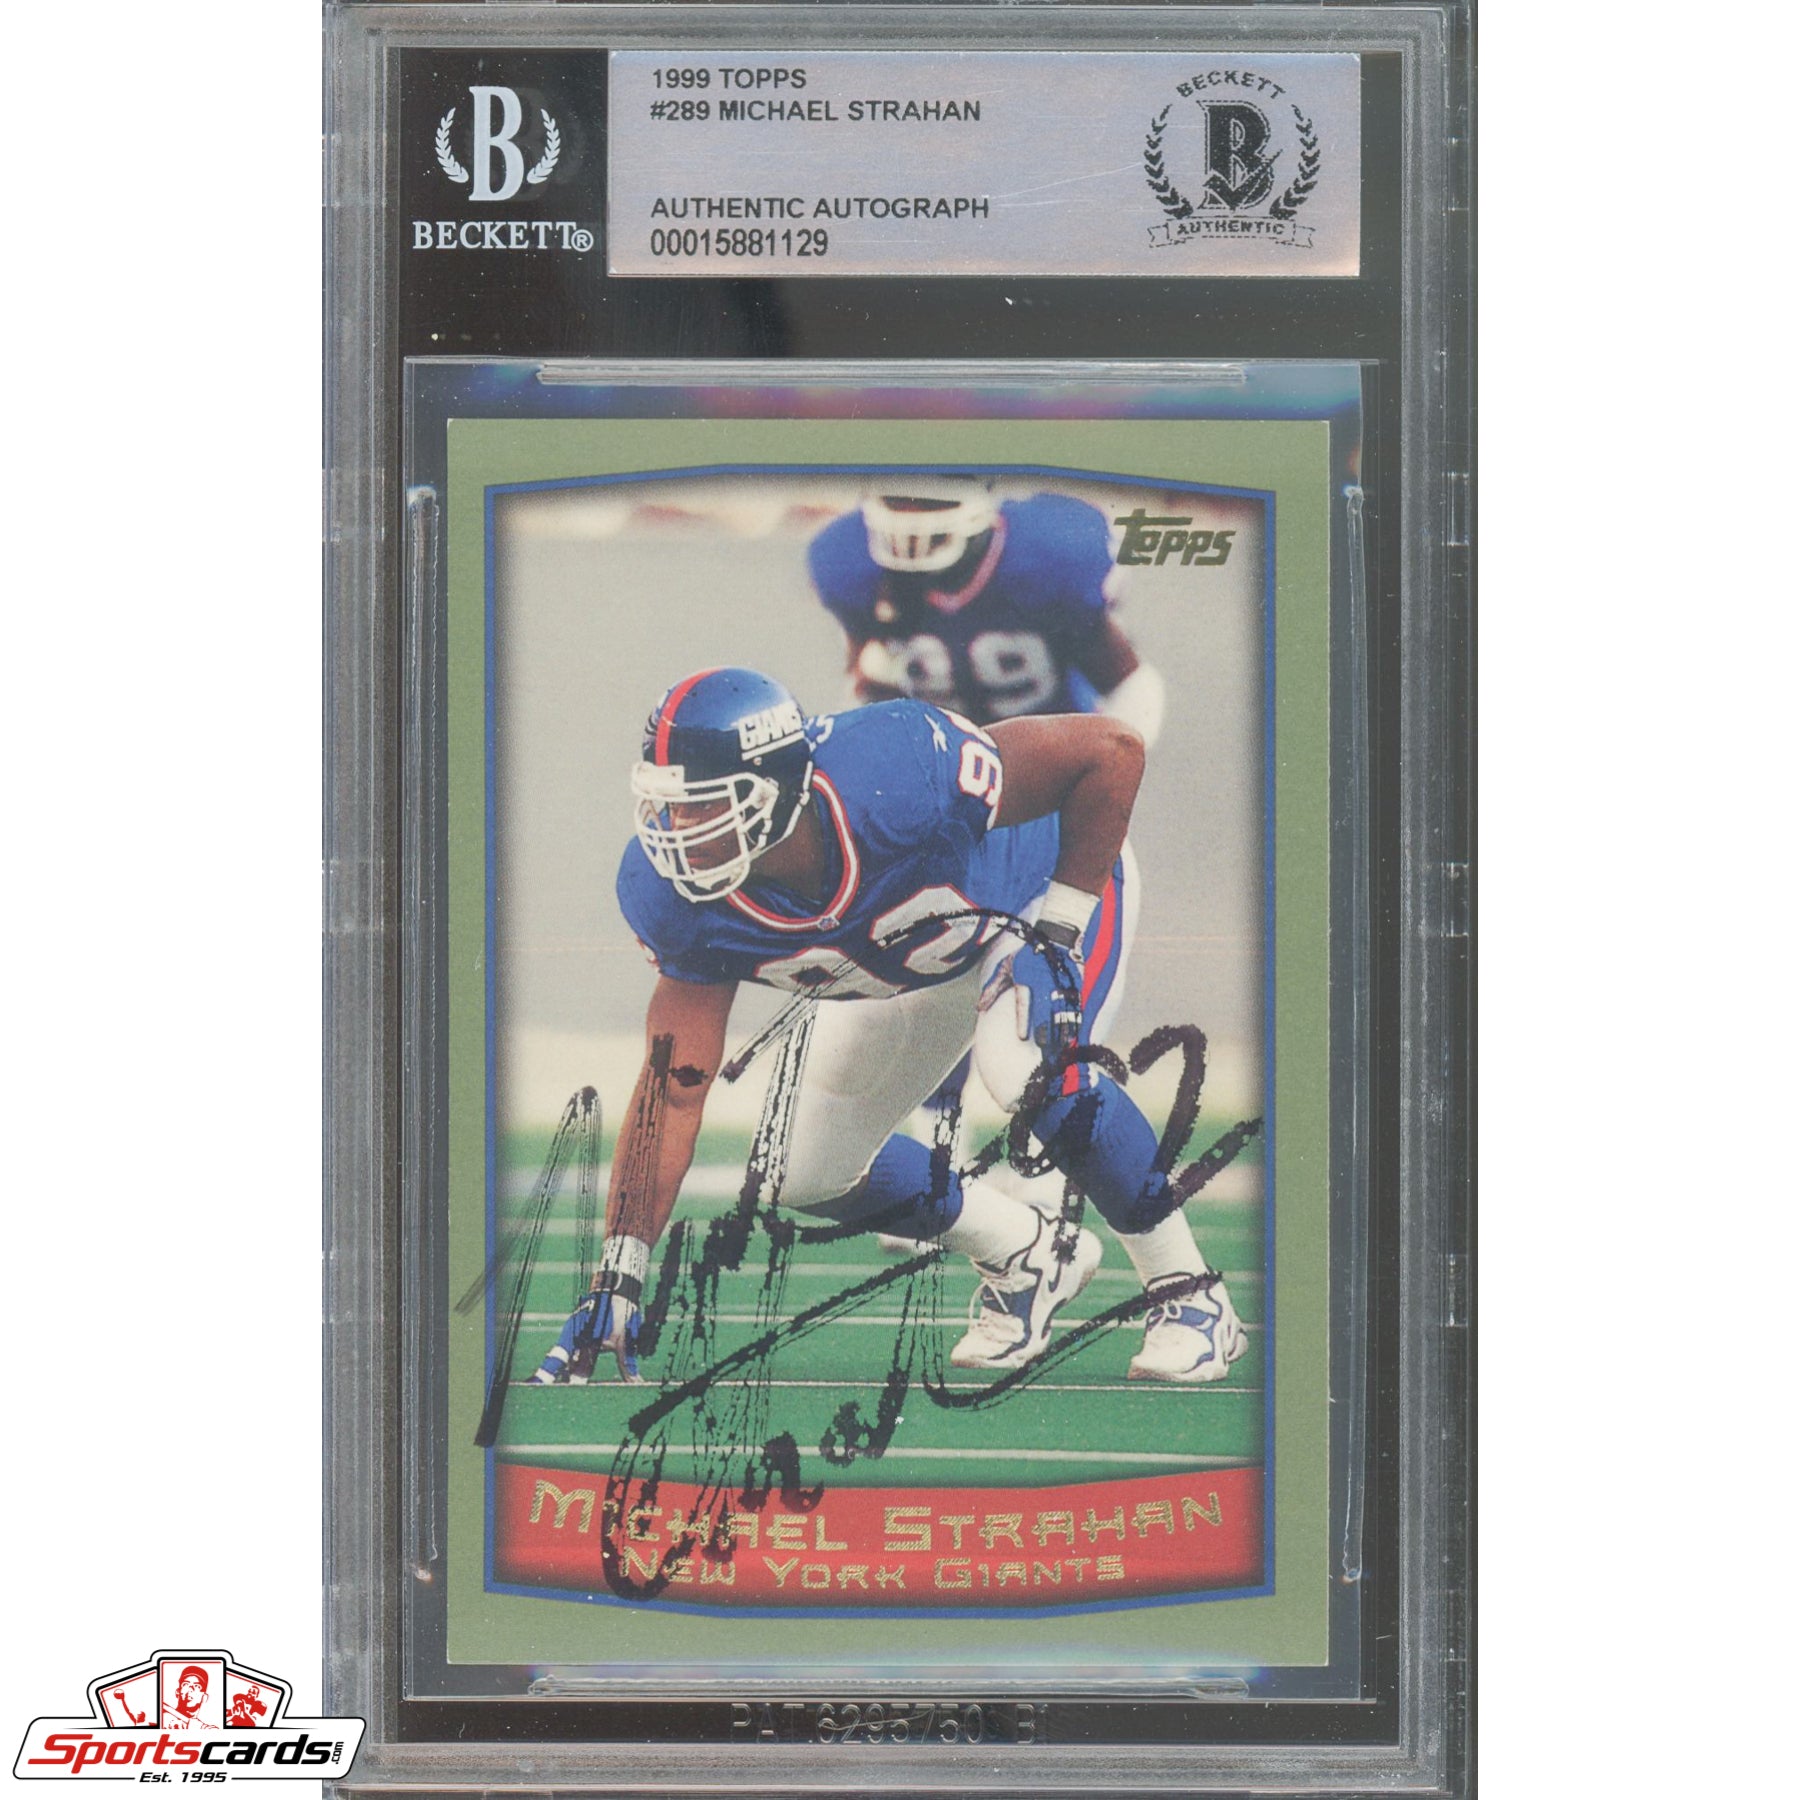 1999 Topps #289 Michael Strahan Signed Auto Beckett BAS Giants